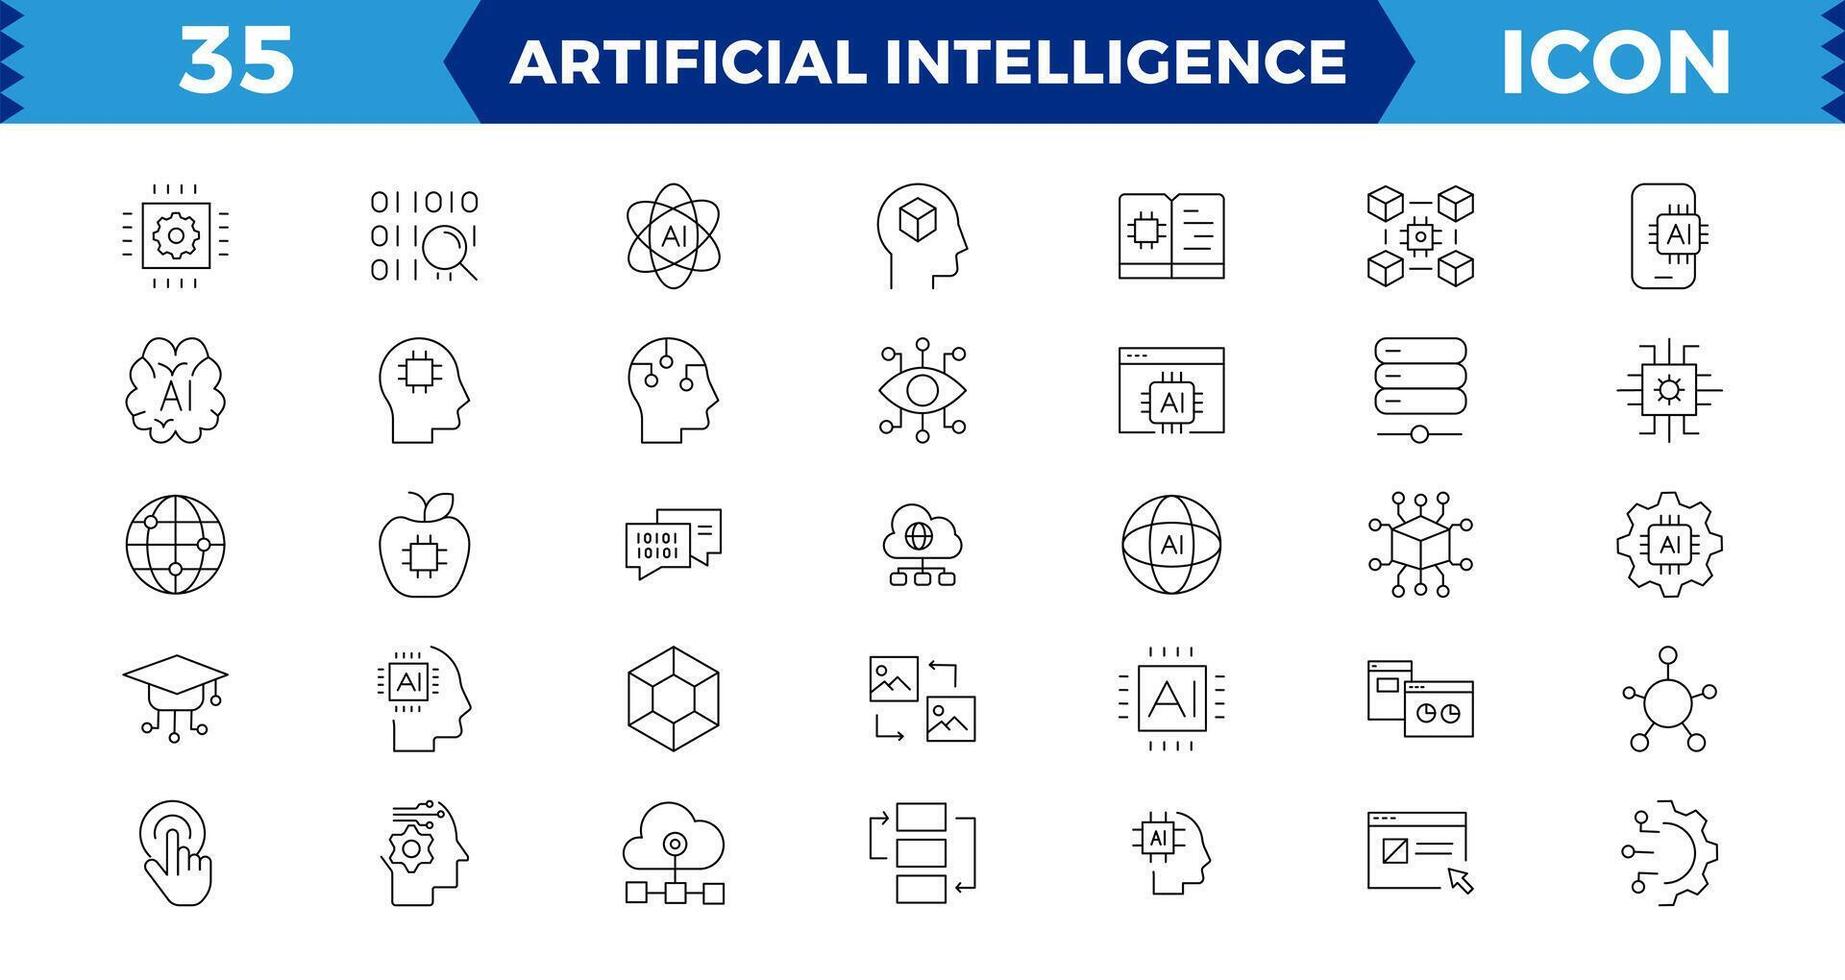 Artificial intelligence Pixel Perfect set of web icons in line style. AI technology icons for web and mobile app. Machine learning, digital AI technology, smart robotic, cloud computing network. vector